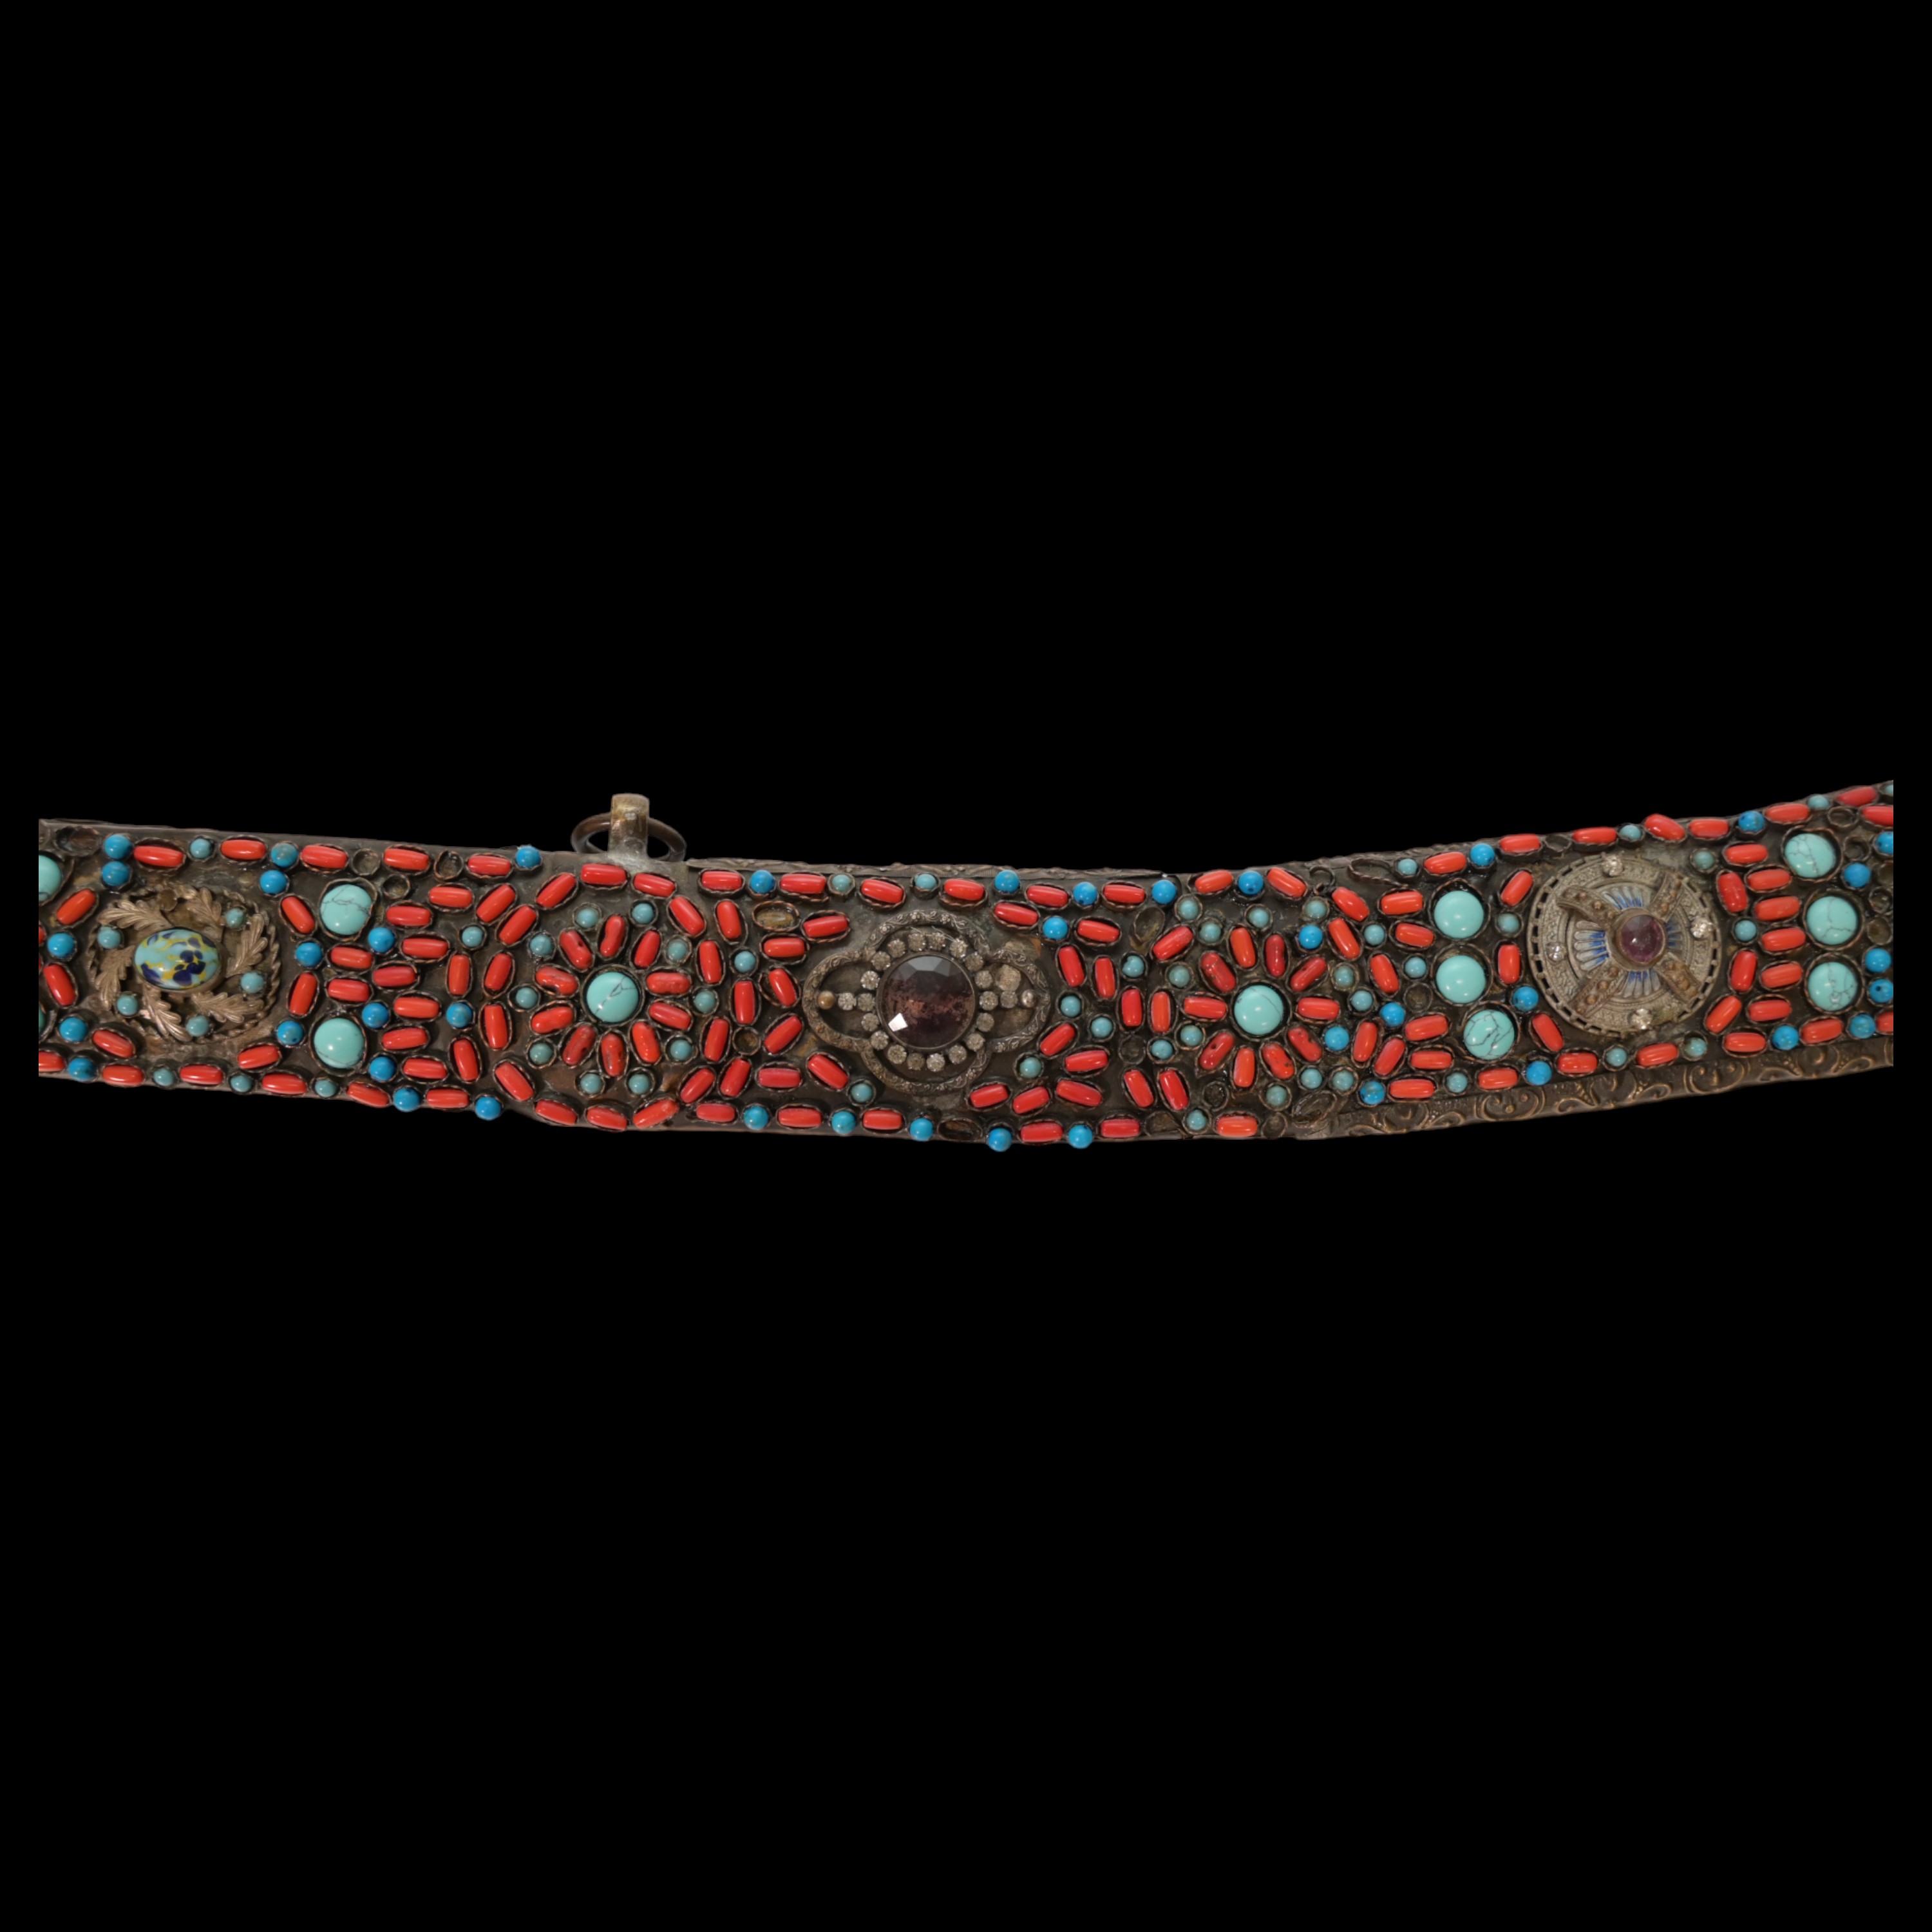 Rare Ottoman sword, Kilij, Pala, decorated with corals and turquoise, Turkey, Trabzon, around 1800. - Image 9 of 31